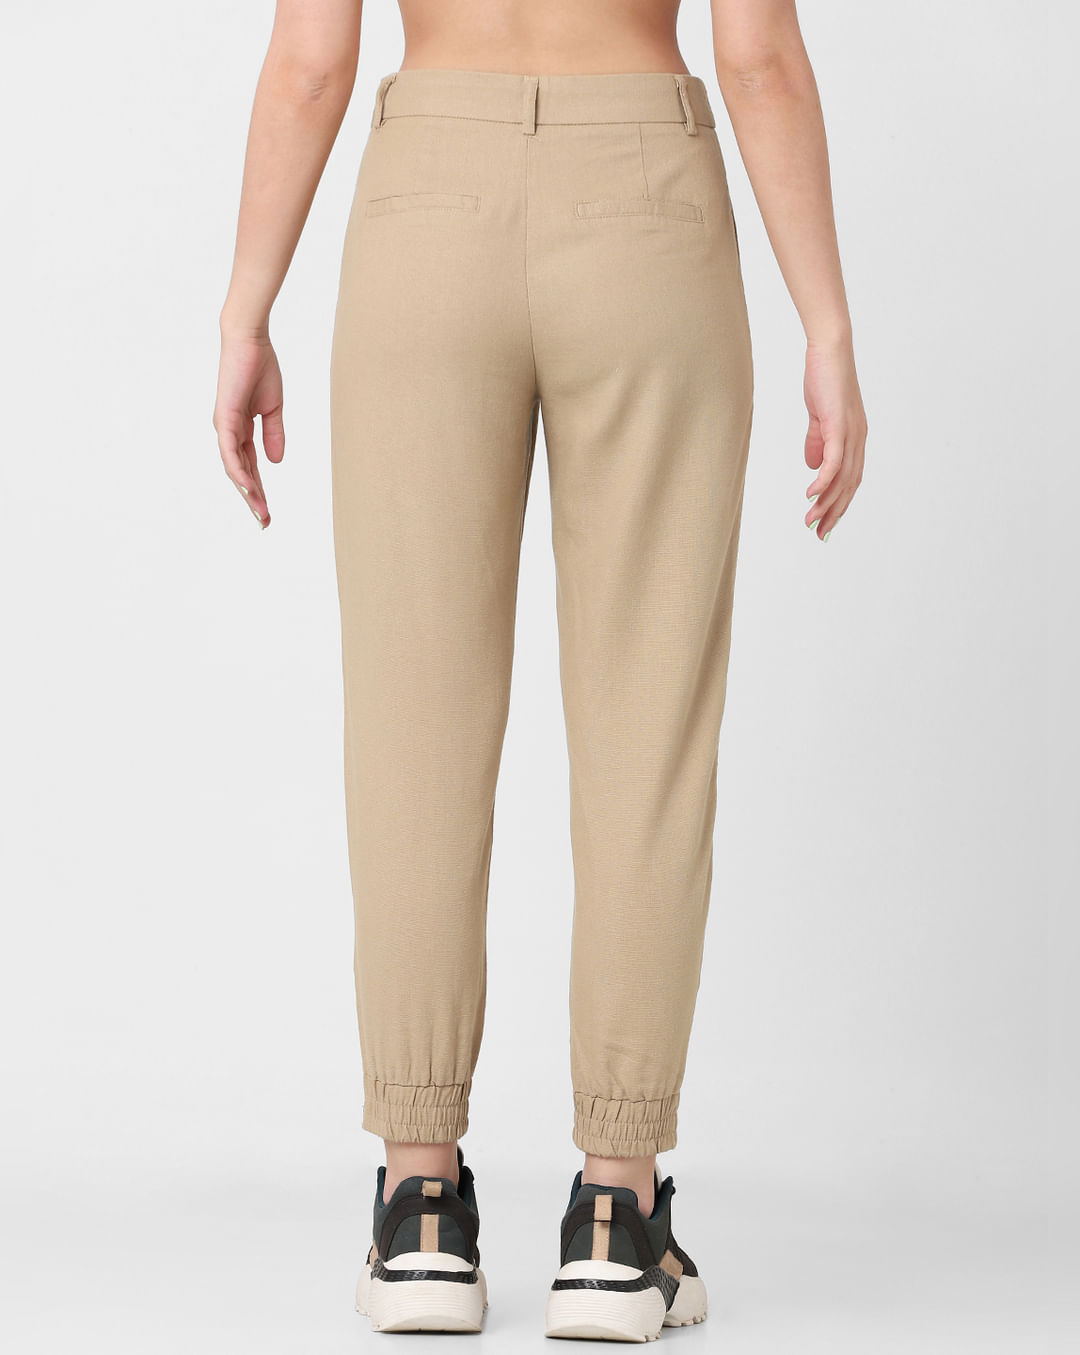 Buy Khaki Mid Rise Slim Fit Pants for Women, ONLY